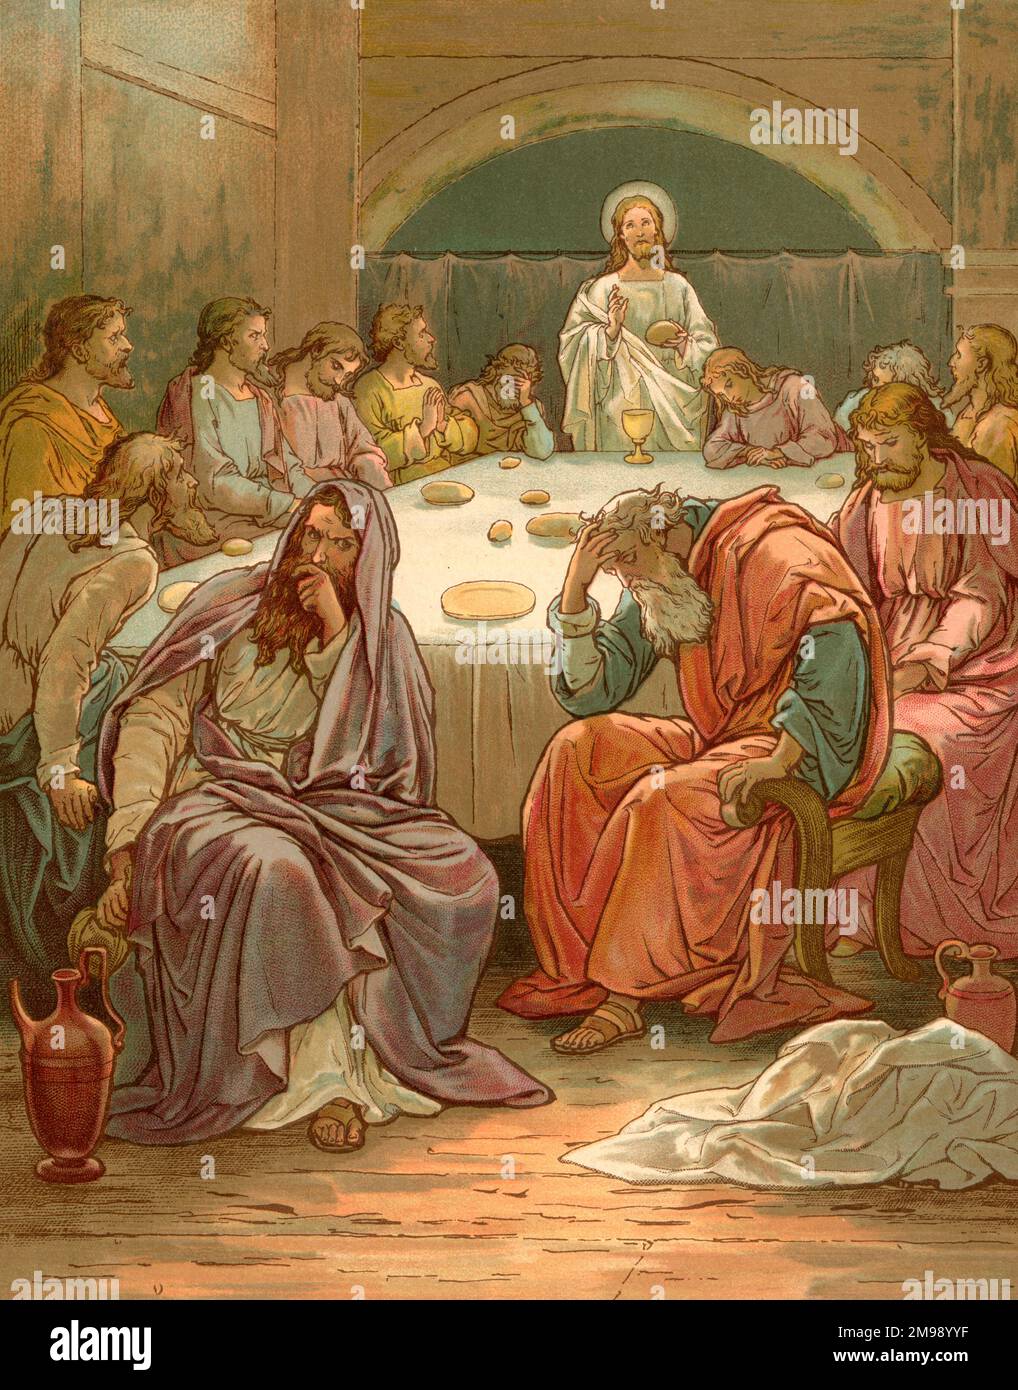 Biblical Tales by John Lawson, Jesus at the Last Supper Stock Photo - Alamy